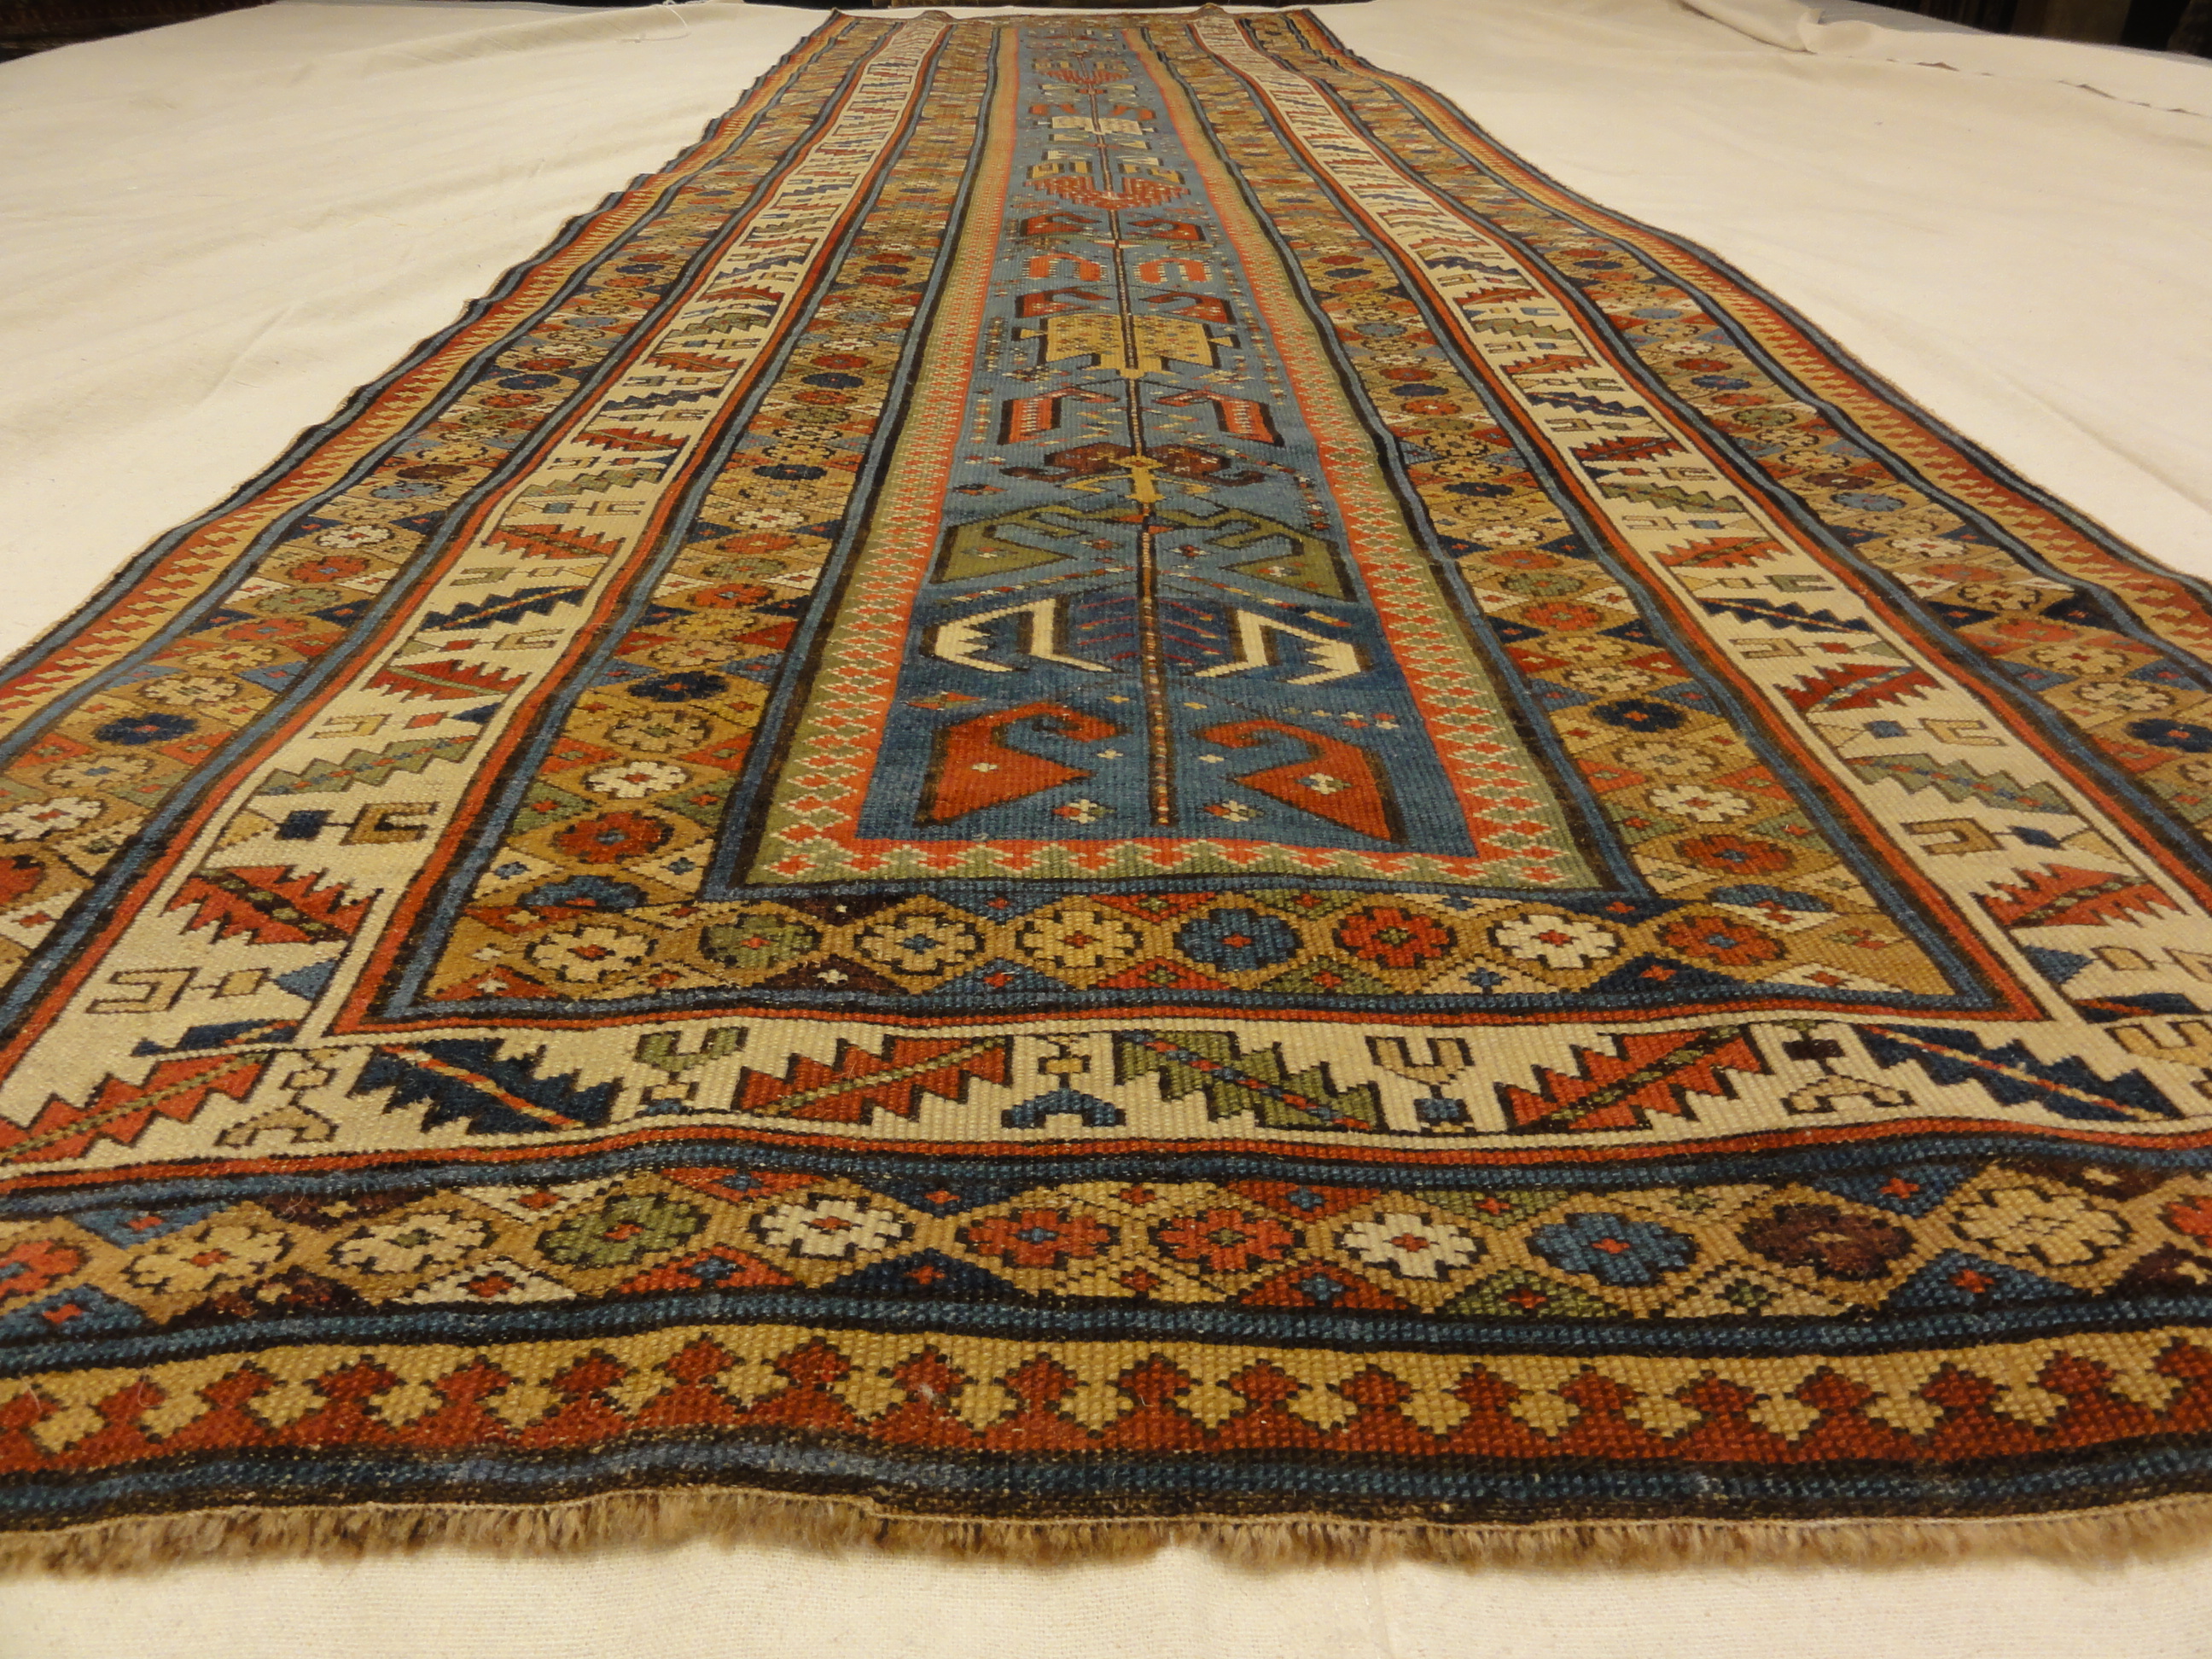 Antique Early 19th Century Shirvan Runner Rug. A piece of genuine authentic woven carpet art sold by the Santa Barbara Design Center Rugs and More.